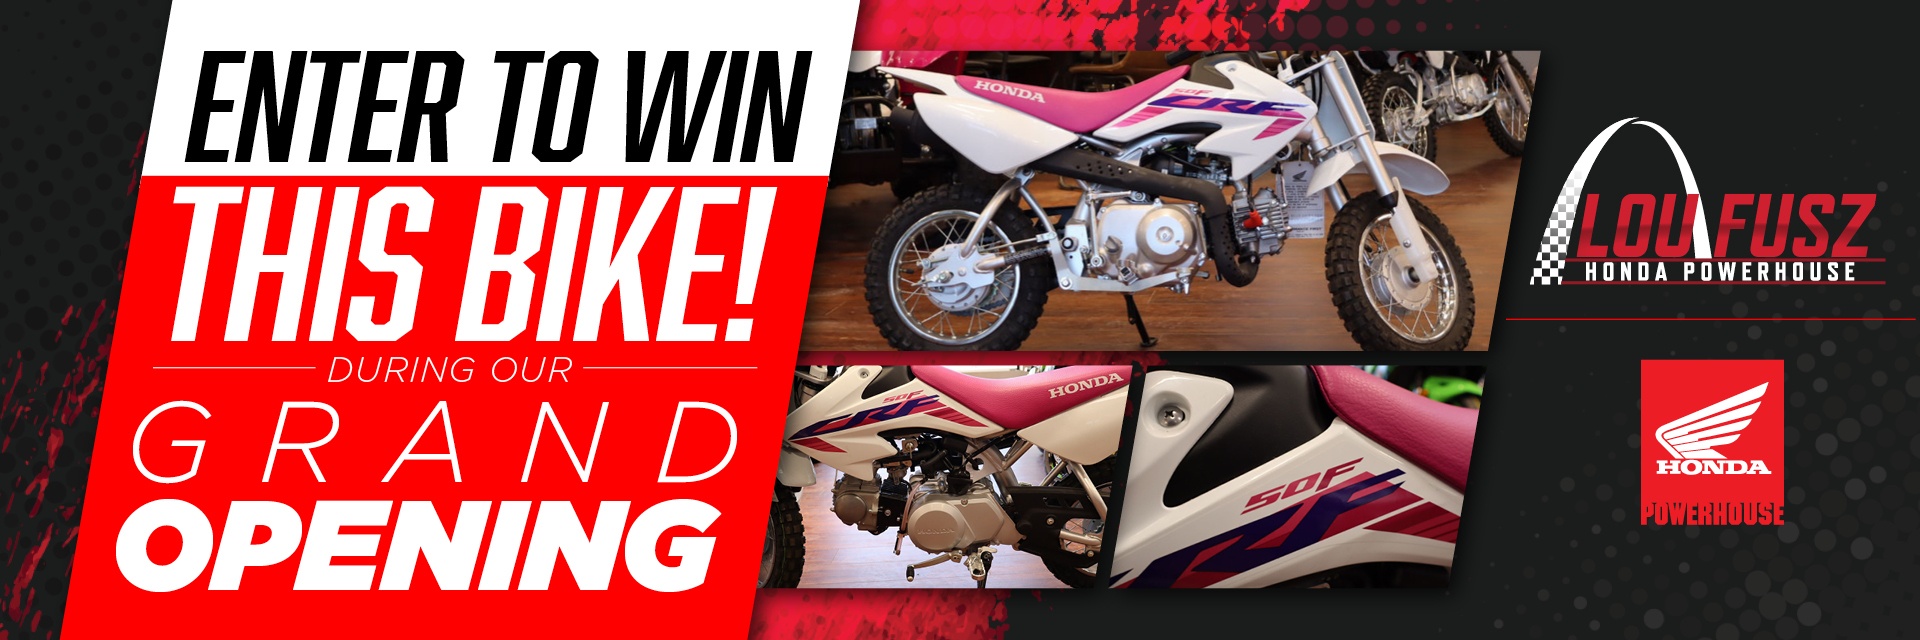 Enter to win this bike! During our Grand Opening